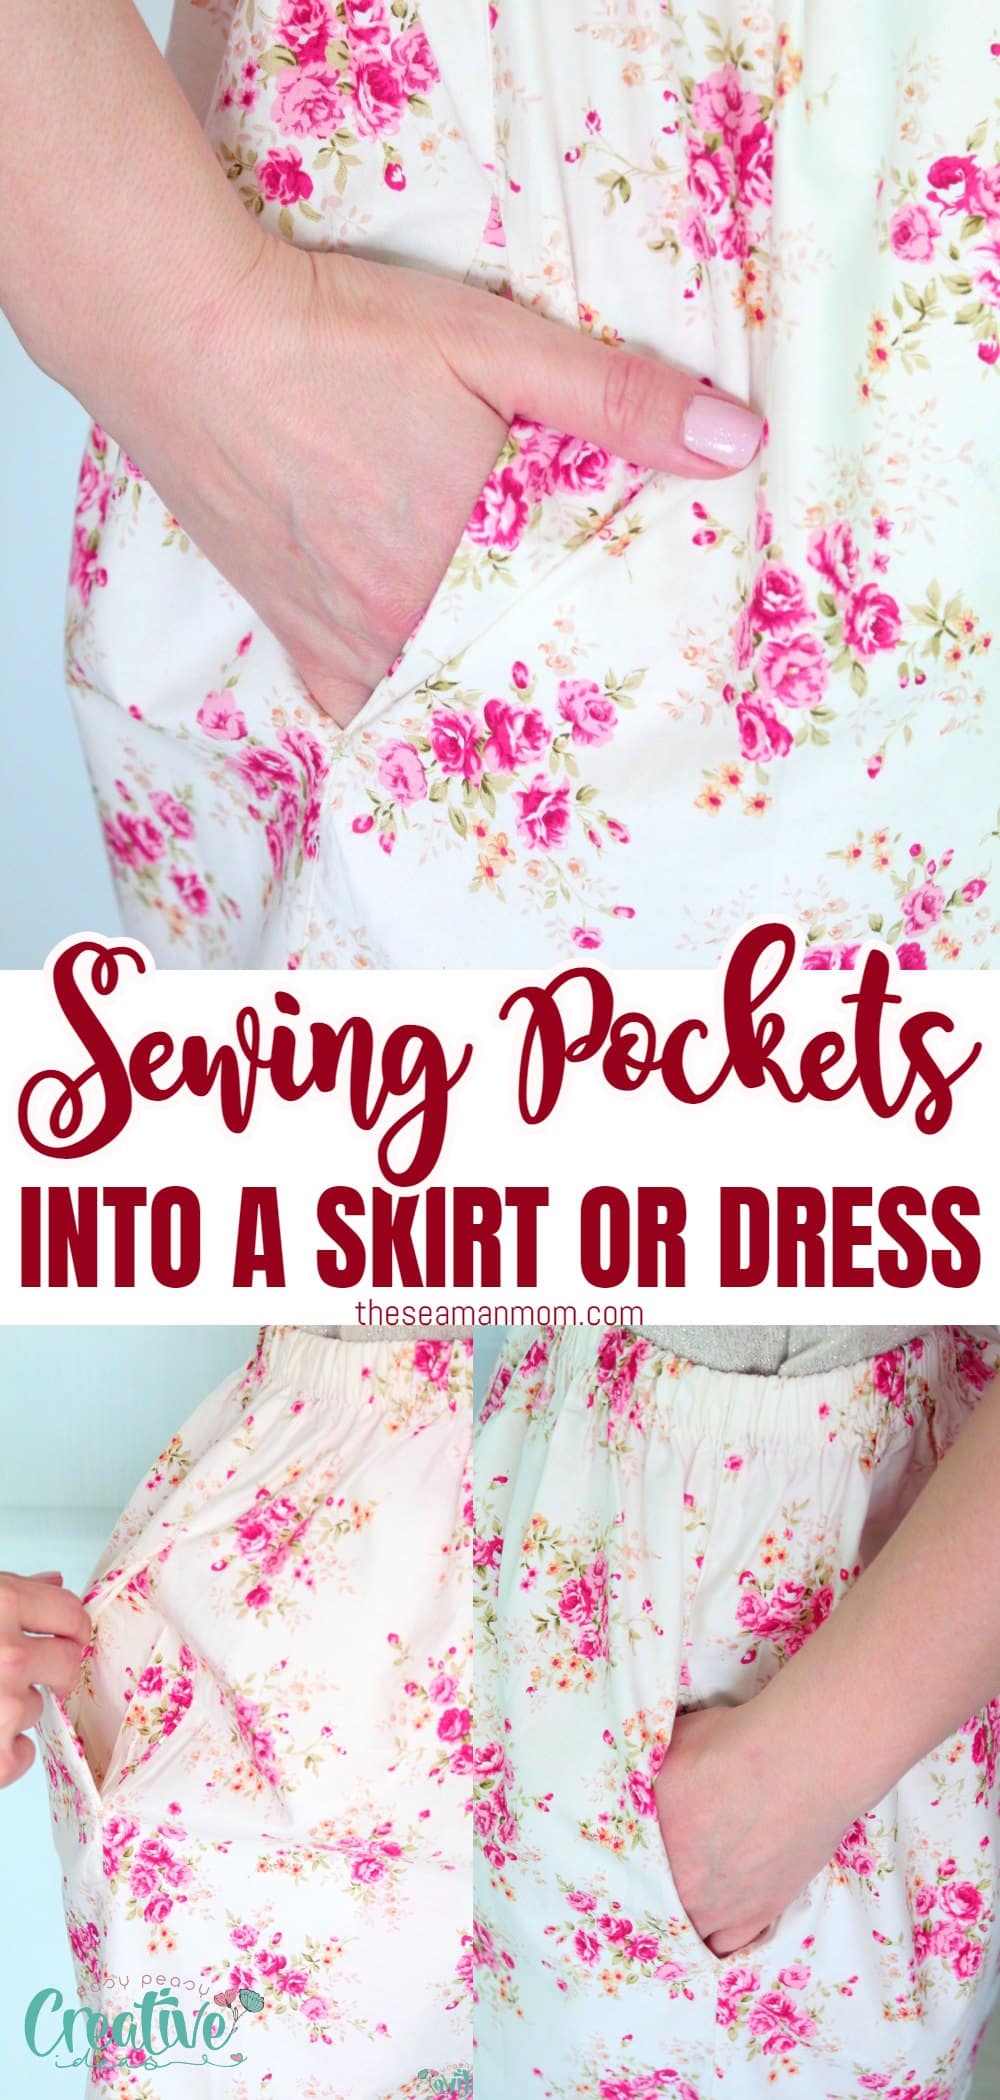 Adding pockets can be a great way to give your skirts and dresses a functional style! In this easy and simple tutorial, you'll learn how to create inseam pockets, which are the most common type of pocket for skirts or dresses. You'll have stylish and practical pockets in no time for all your skirts and dresses! via @petroneagu